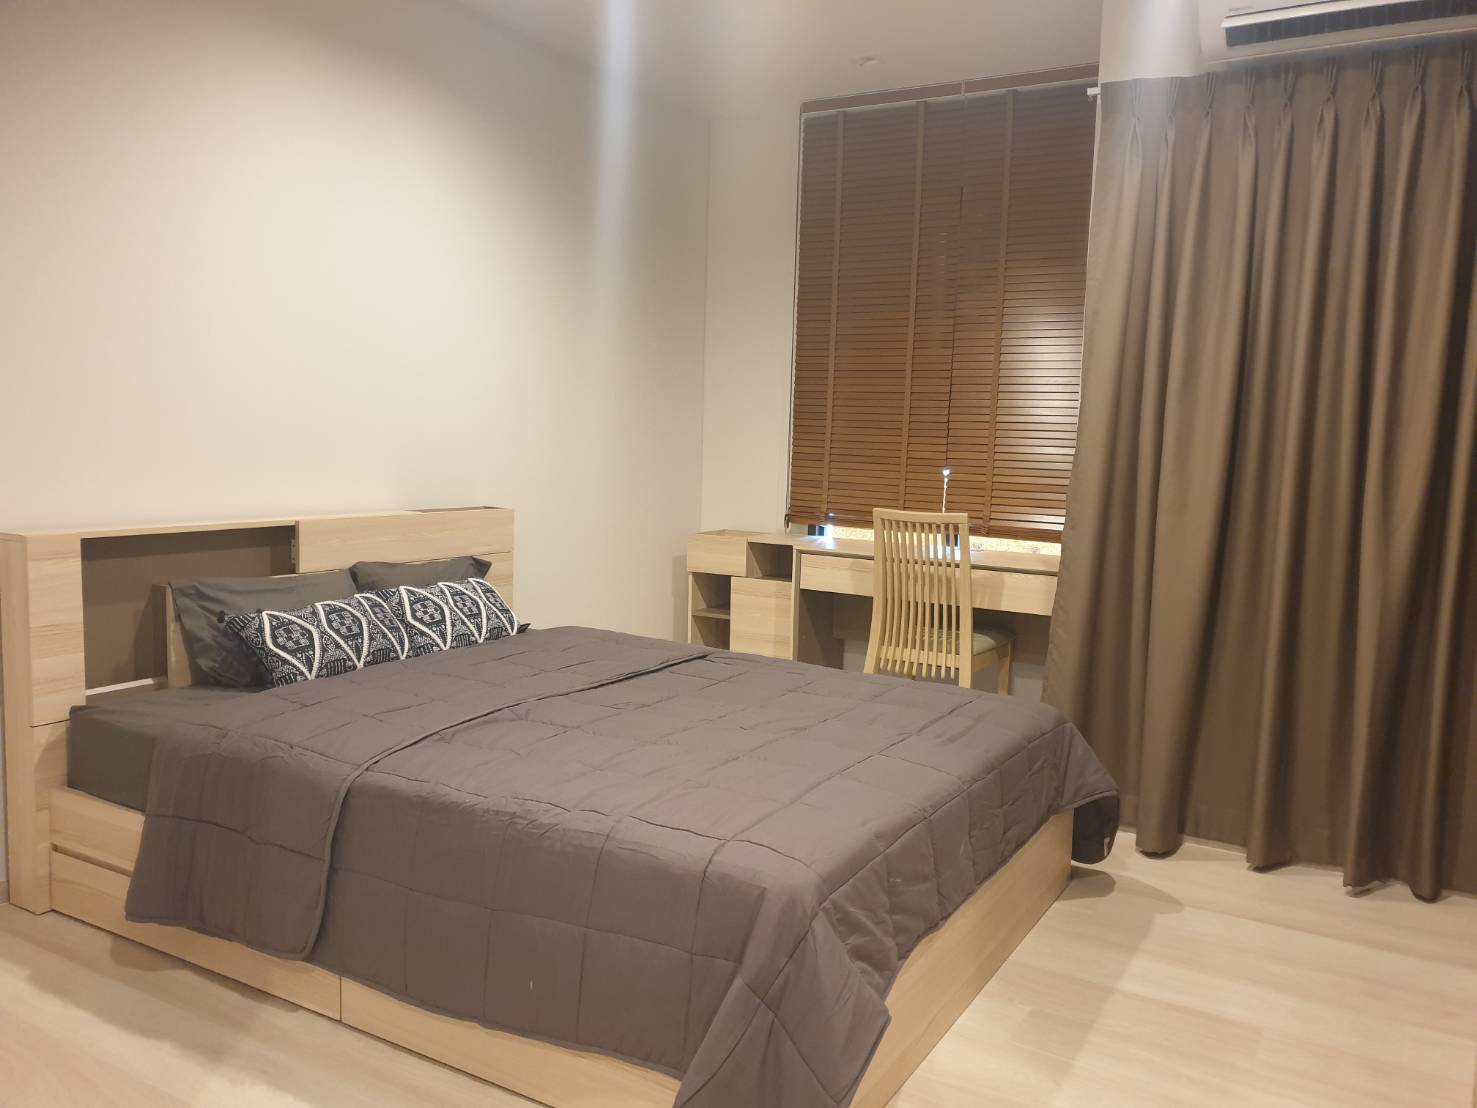 Life One Wireless for Rent – BTS Phloen Chit 600 meters – Unit 24 Sq.m.